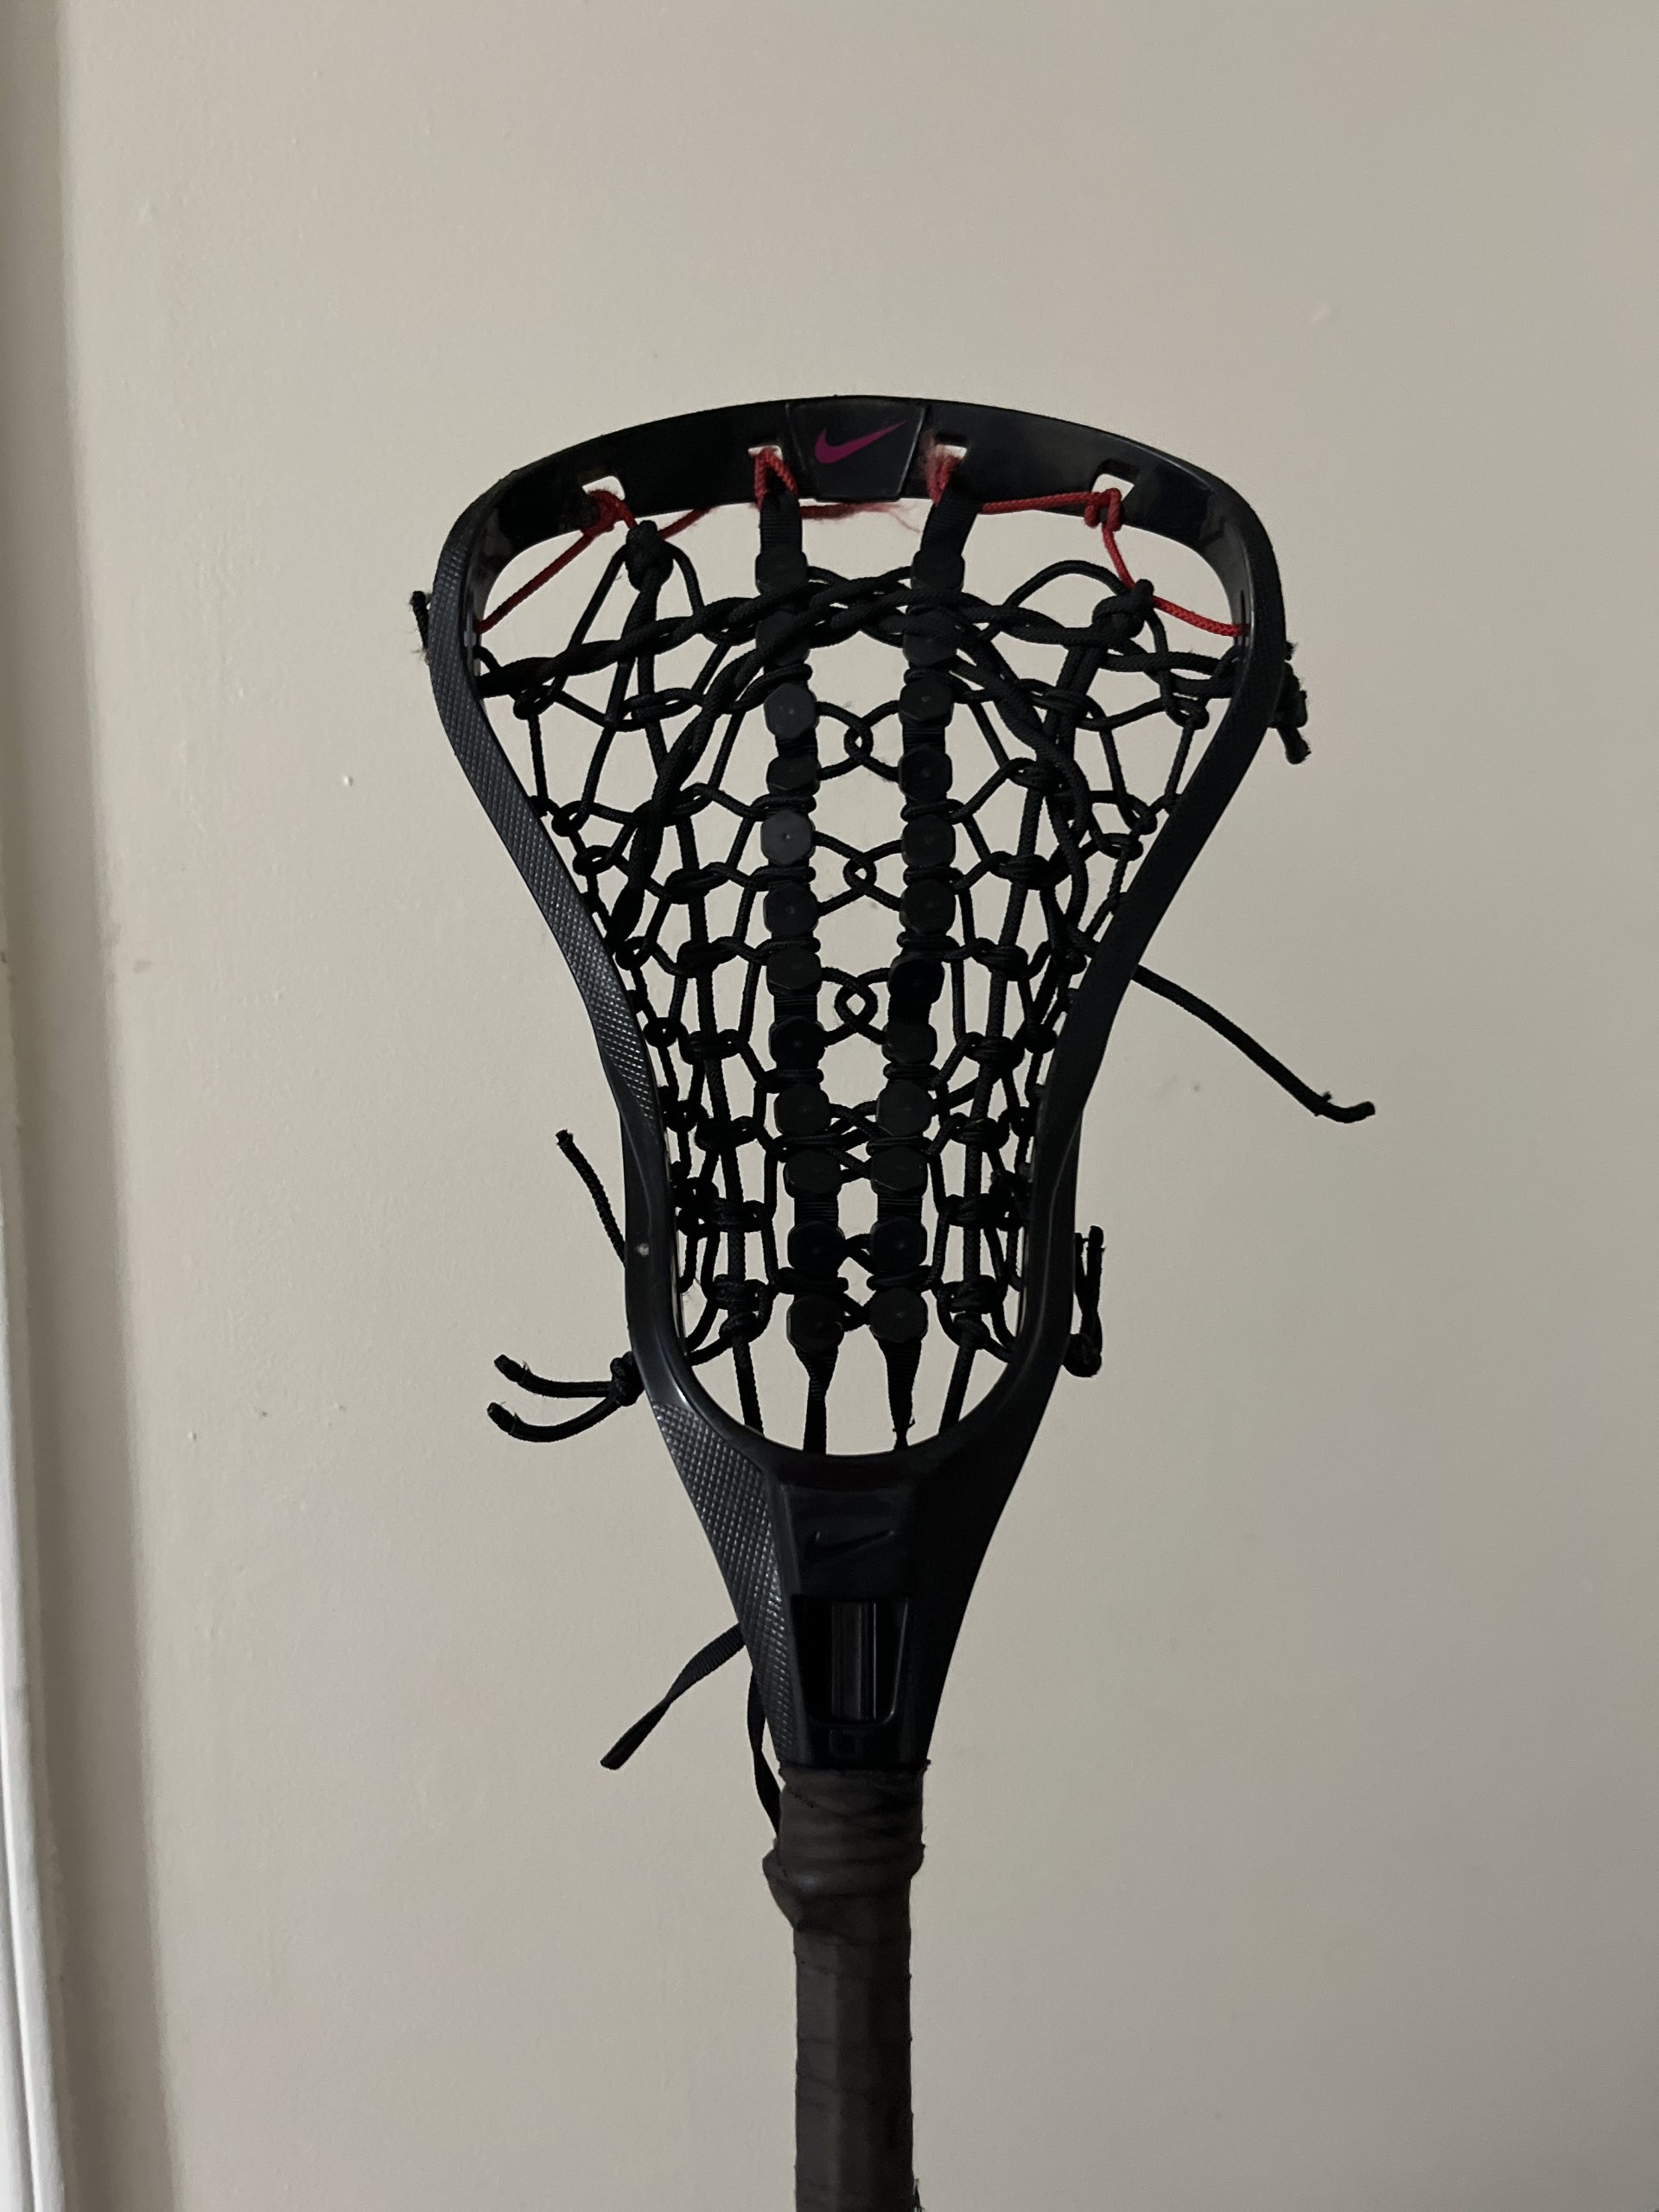 Girls black Nike lacrosse which is used every day in the lacrosse game. Photo taken on October 12th.